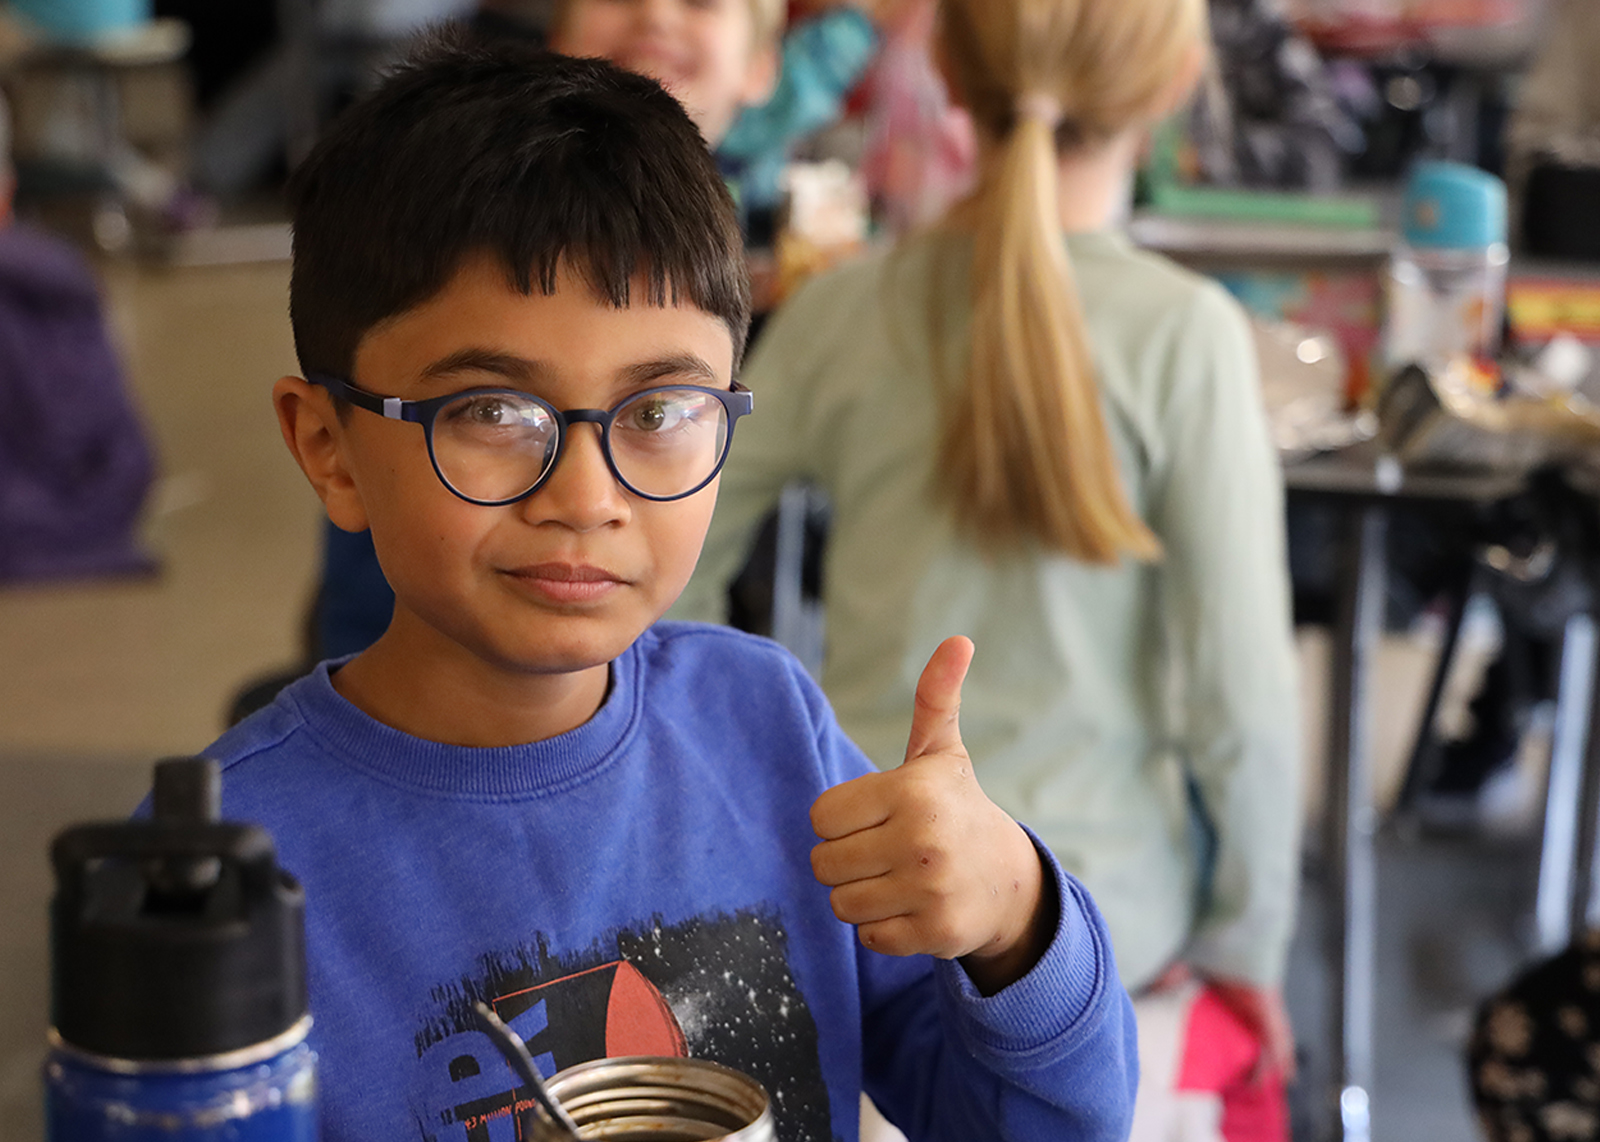 student with glasses gives camera thumbs up